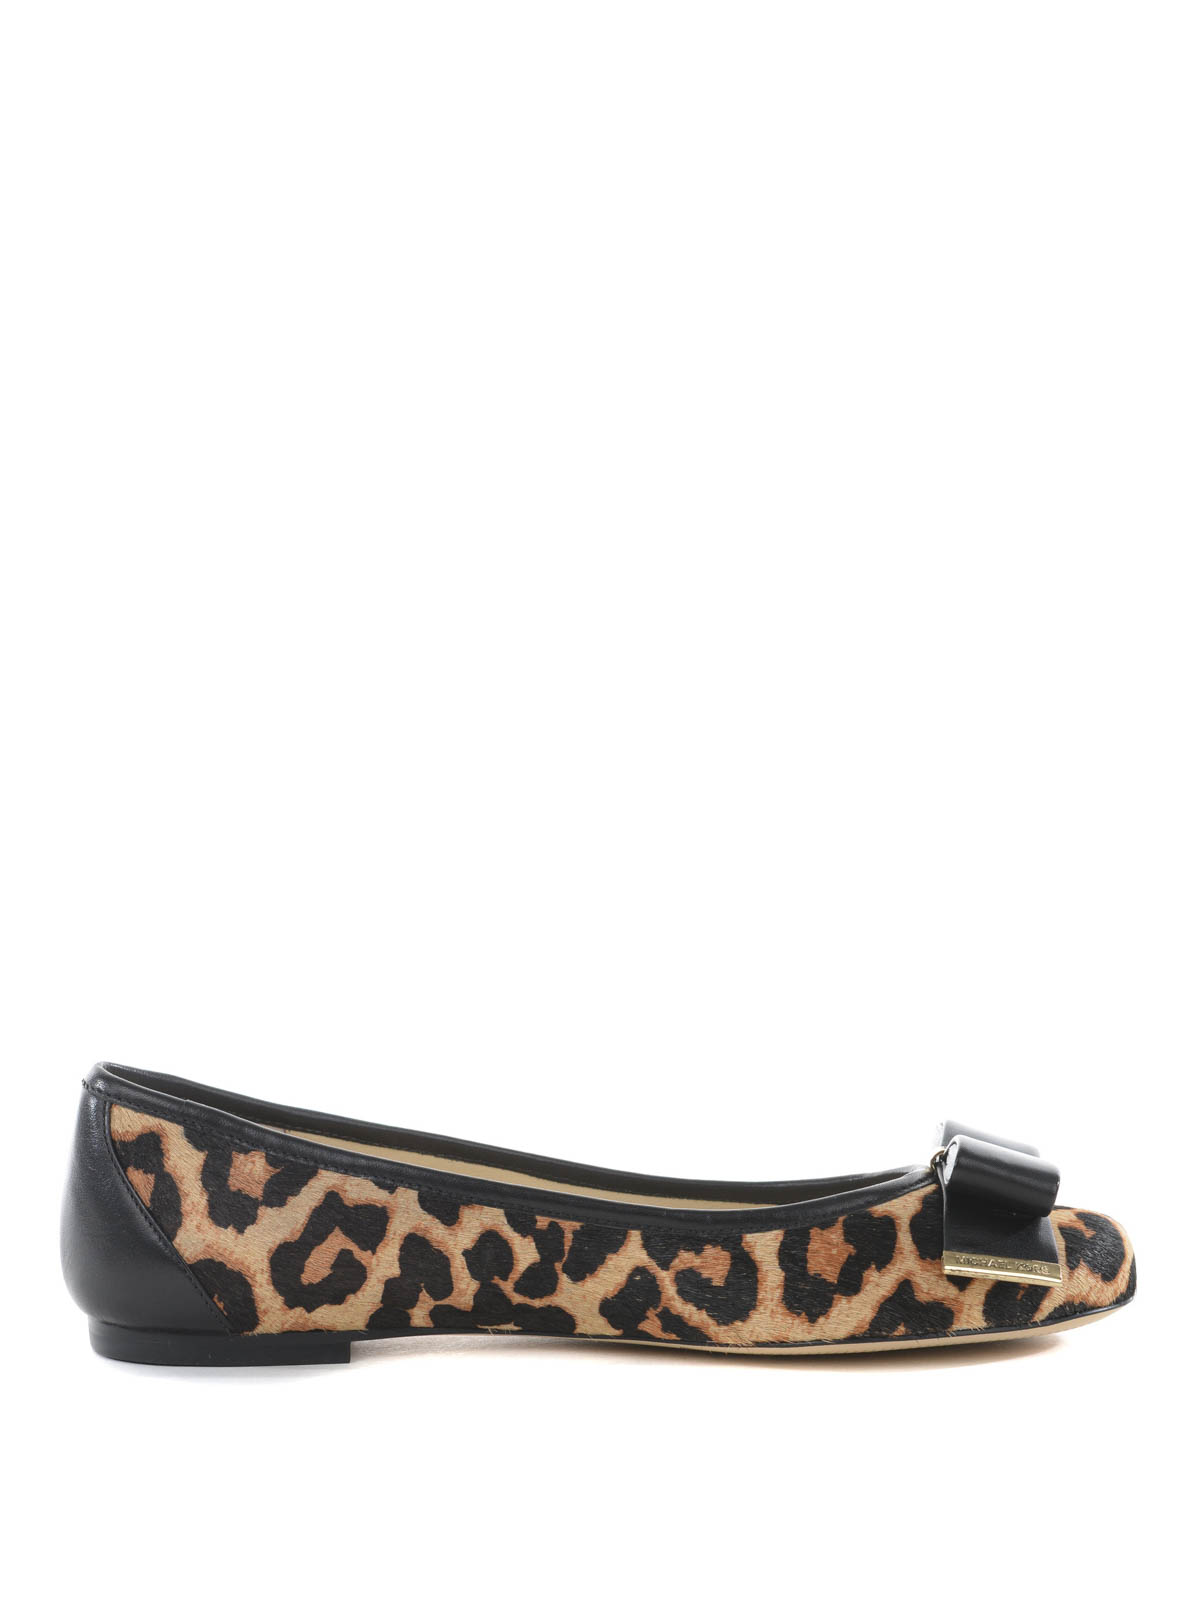 Michael Kors Leopard Print Shoes  clothing  accessories  by owner